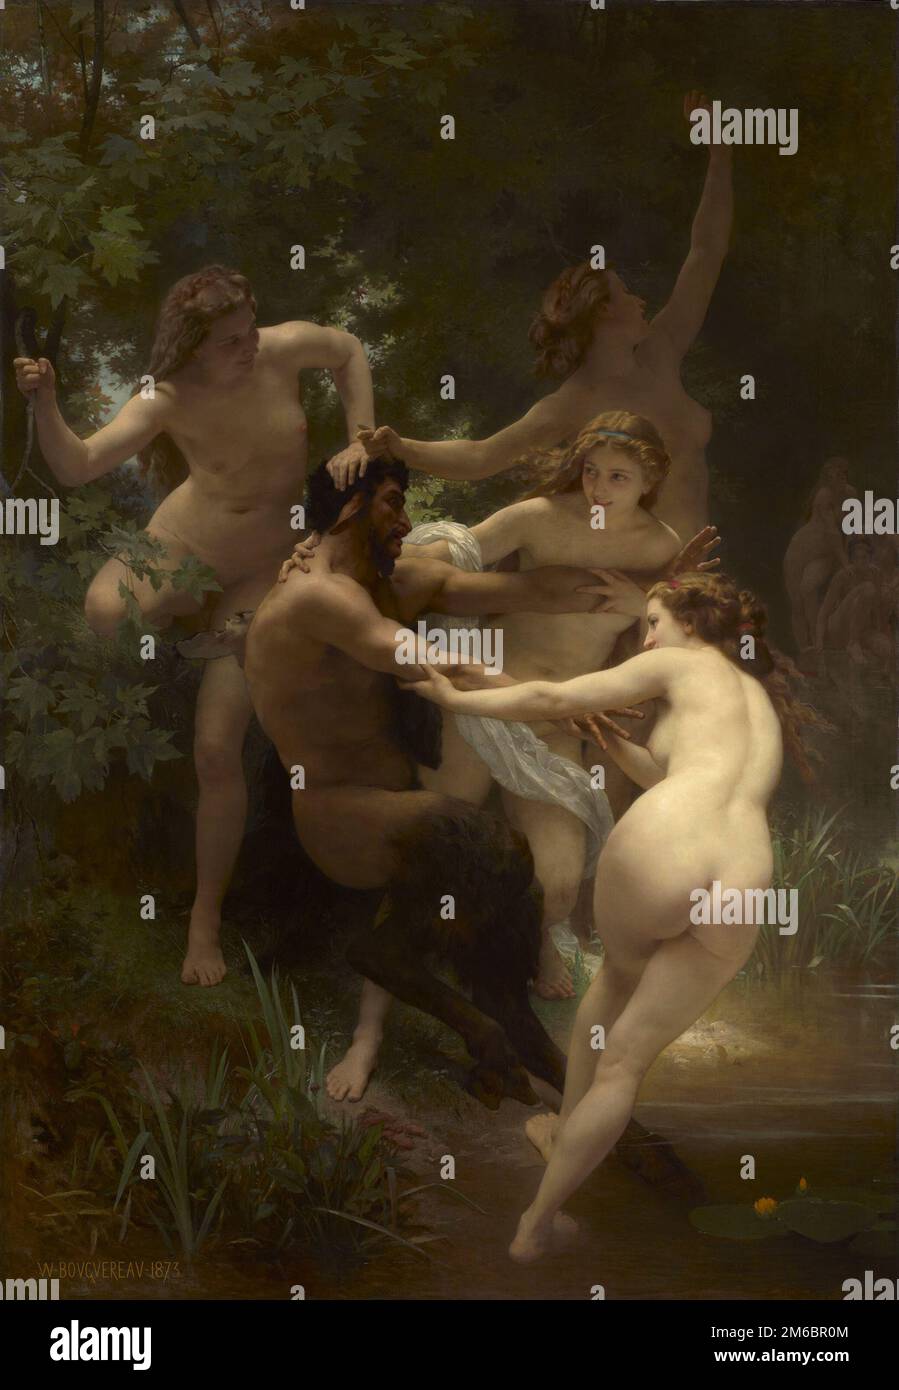 Nymphes et un satyre (Nymphs and Satyr) dipinto dal pittore francese del XIX secolo William-Adolphe Bouguereau nel 1873 Foto Stock